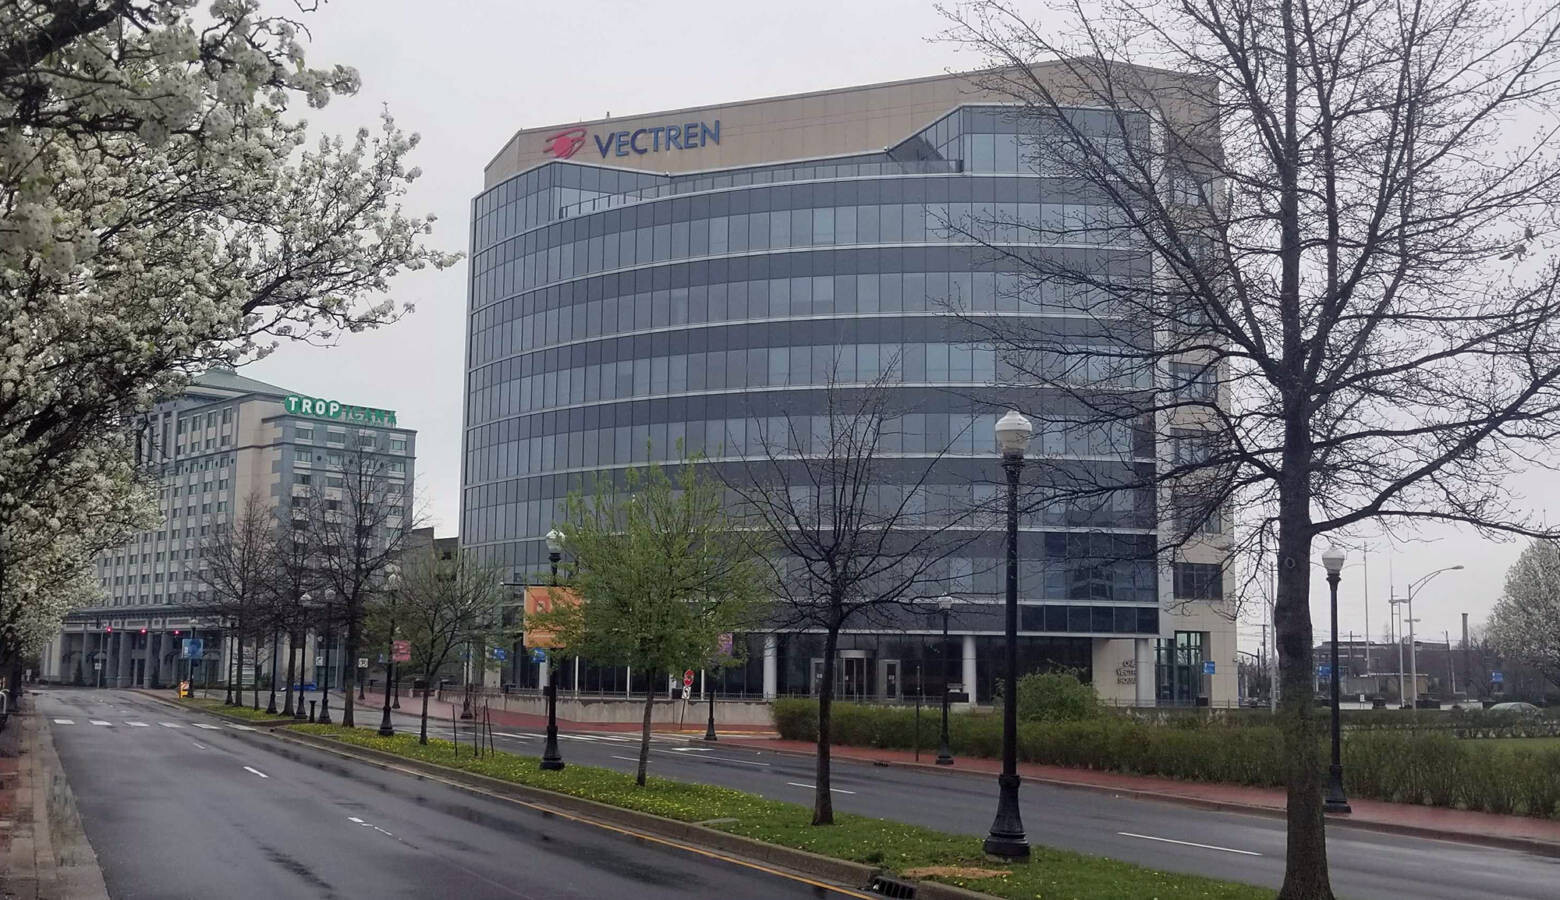 Vectren, headquartered out of Evansville, merged with CenterPoint Energy in 2019 (Samantha Horton/IPB News)